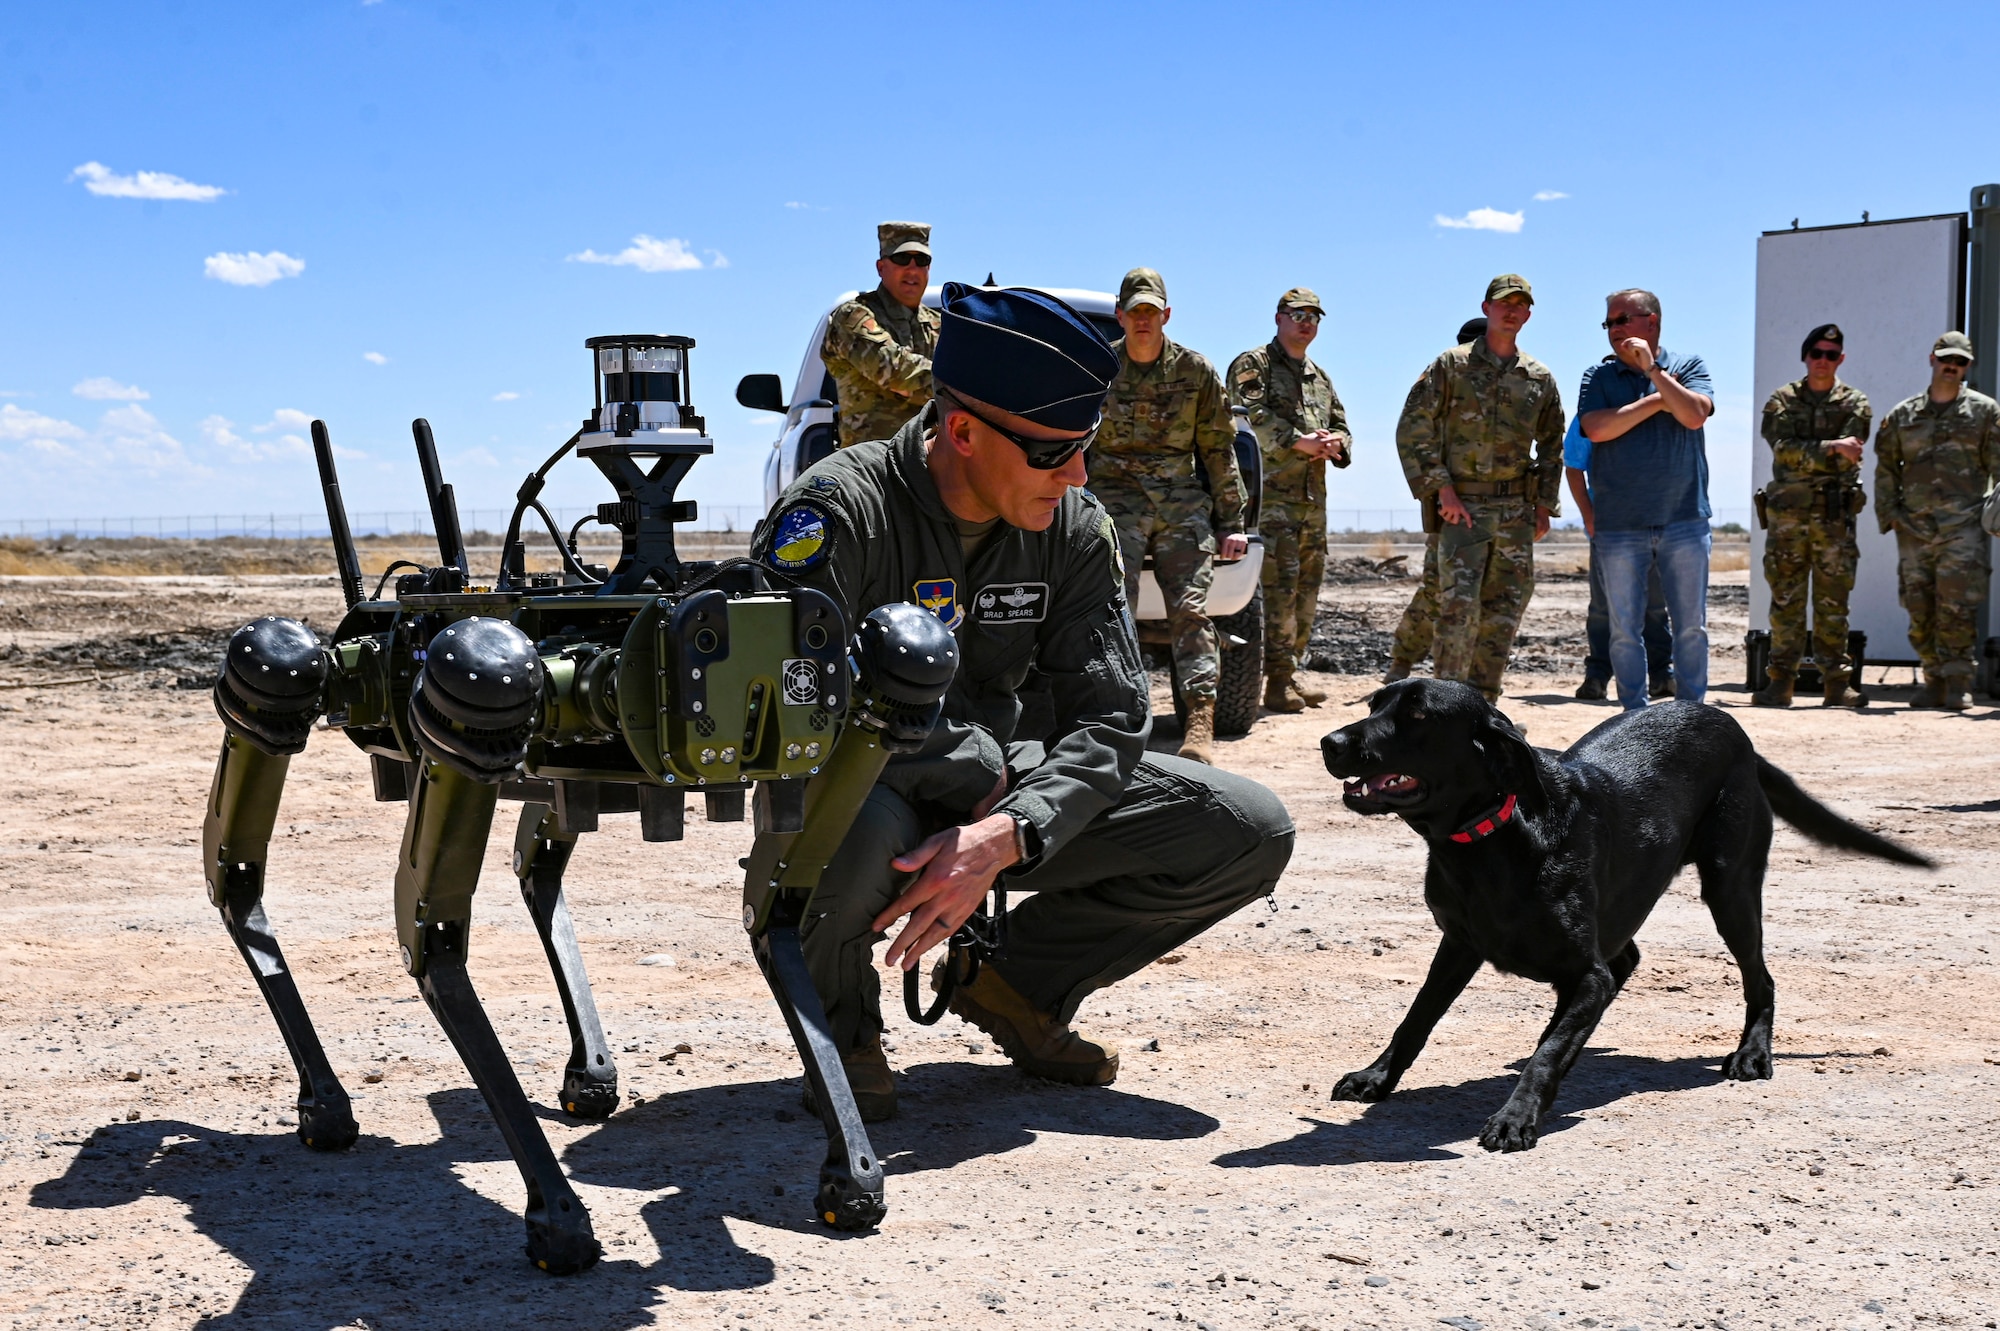 U.S. Air Force Col. Justin Spears, 49th Wing commander, introduces his dog Blue to a Vision 60 Q-UGV ground robot at Holloman Air Force Base, New Mexico, April 17, 2023. The Vision 60 is a quadrupedal ground robot that is capable of maneuvering through rough terrains, making it perfect for patrolling Holloman’s arid environment. (U.S. Air Force photo by Airman 1st Class Isaiah Pedrazzini)